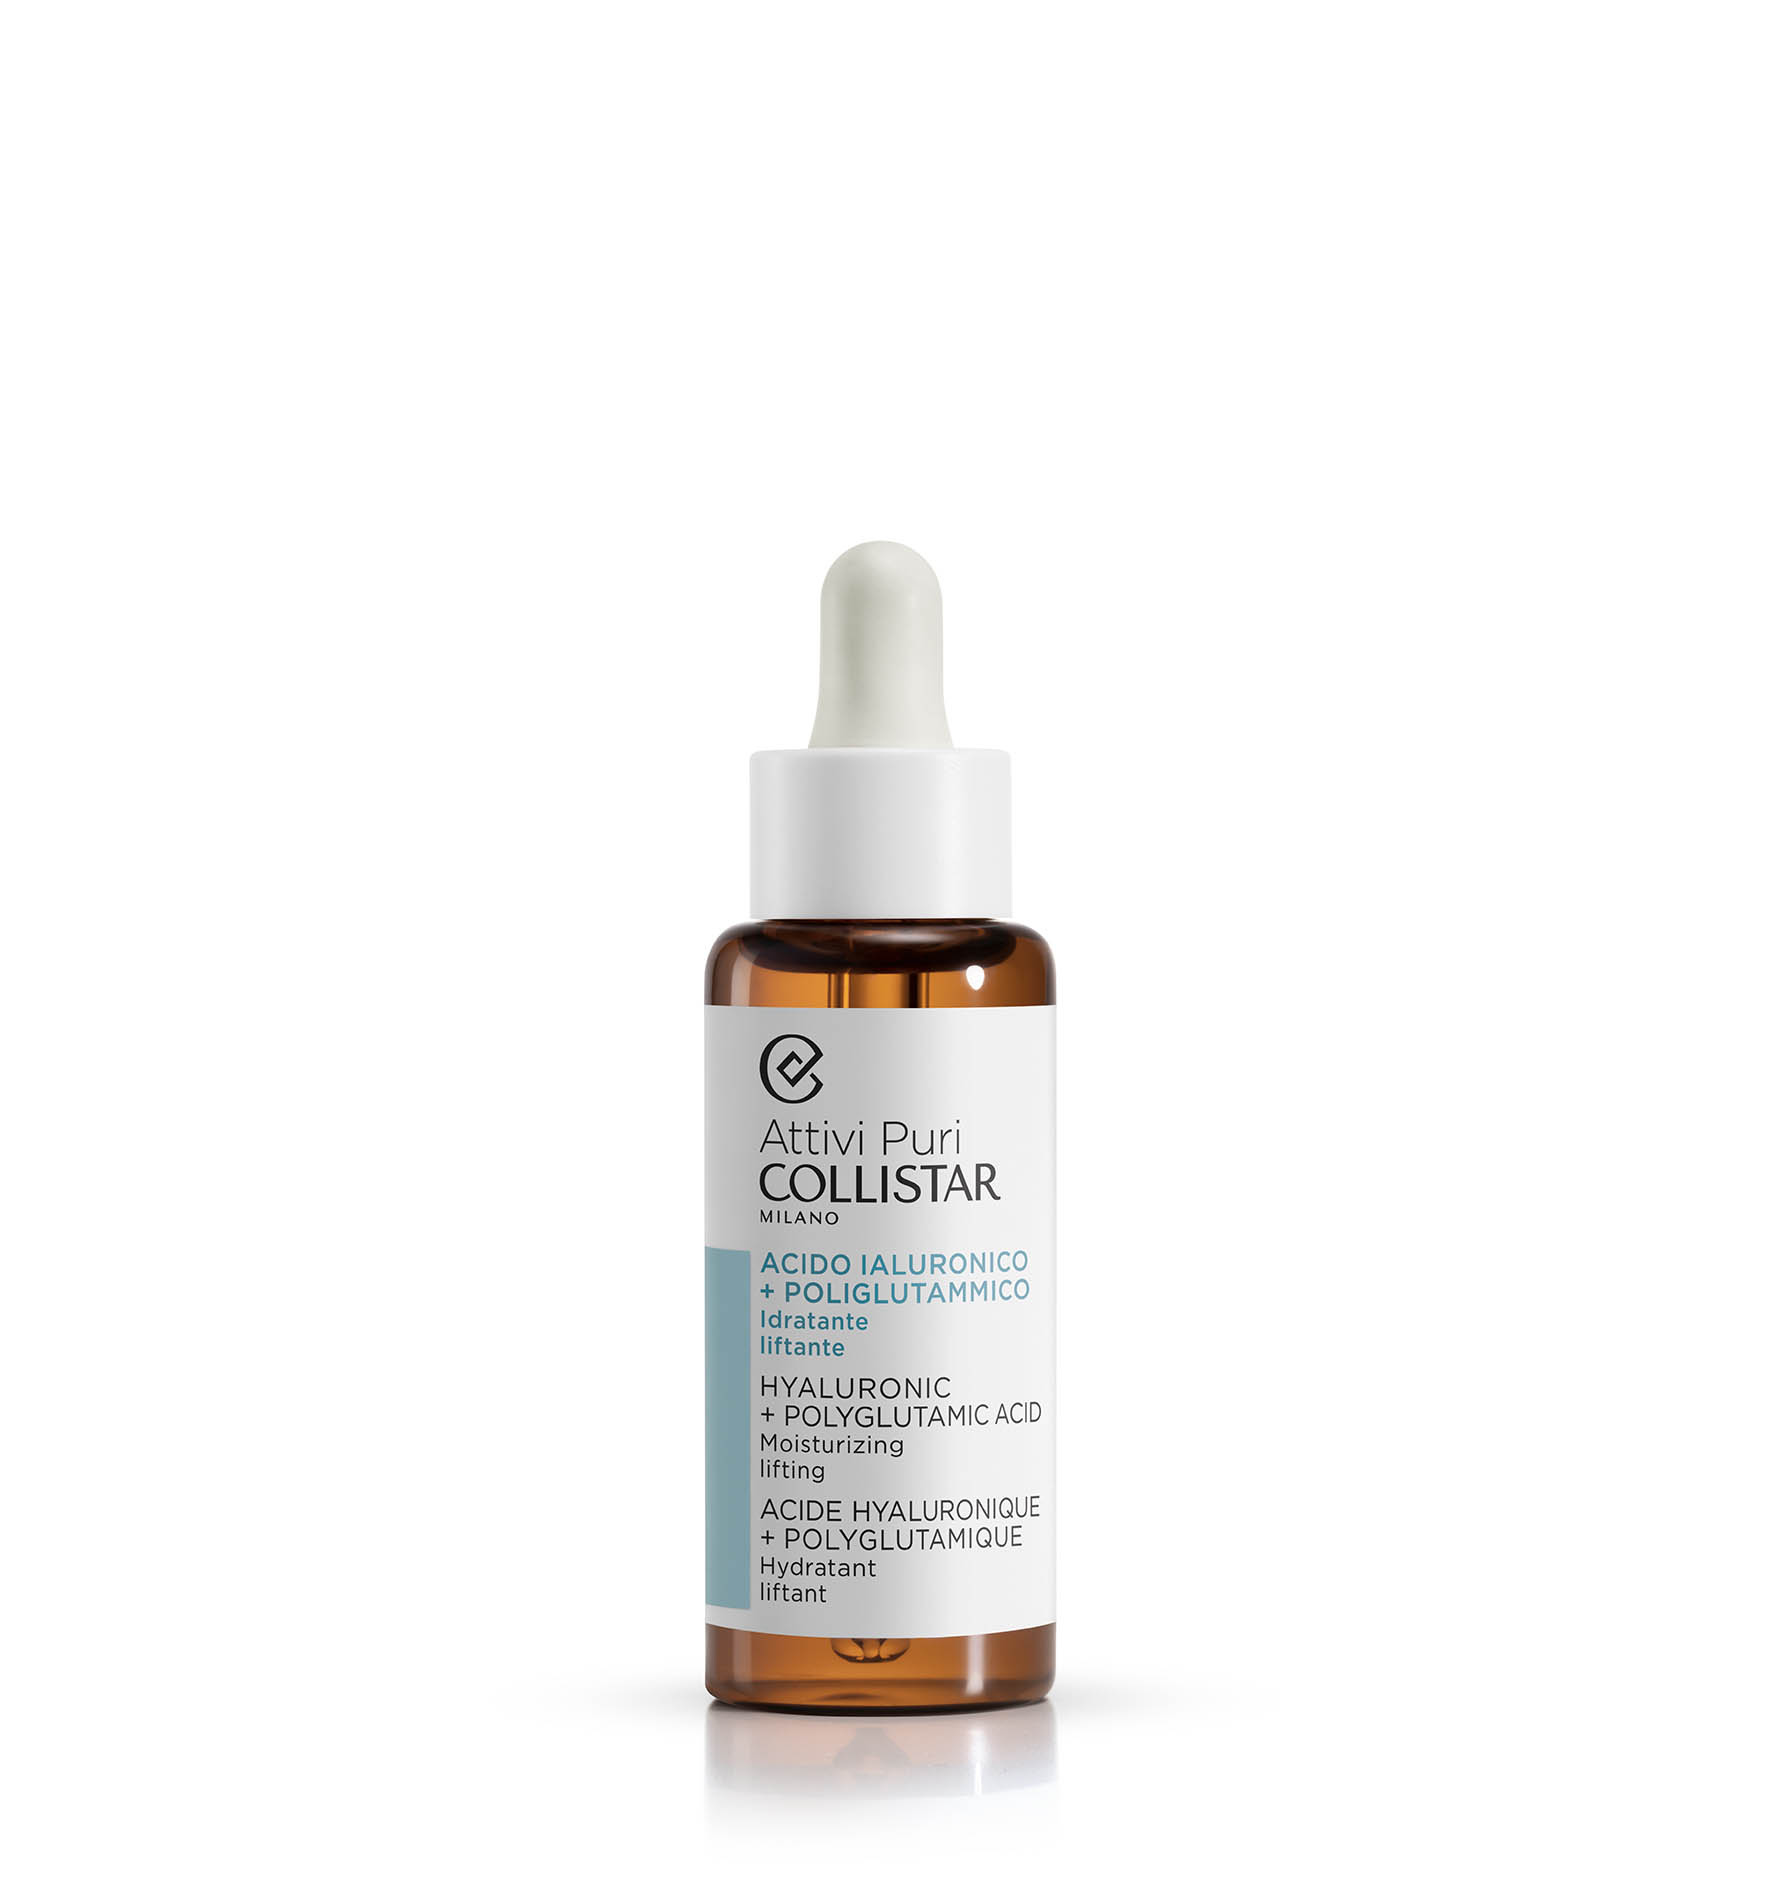 HYALURONIC + POLYGLUTAMIC ACID - Lifting | Collistar - Shop Online Ufficiale